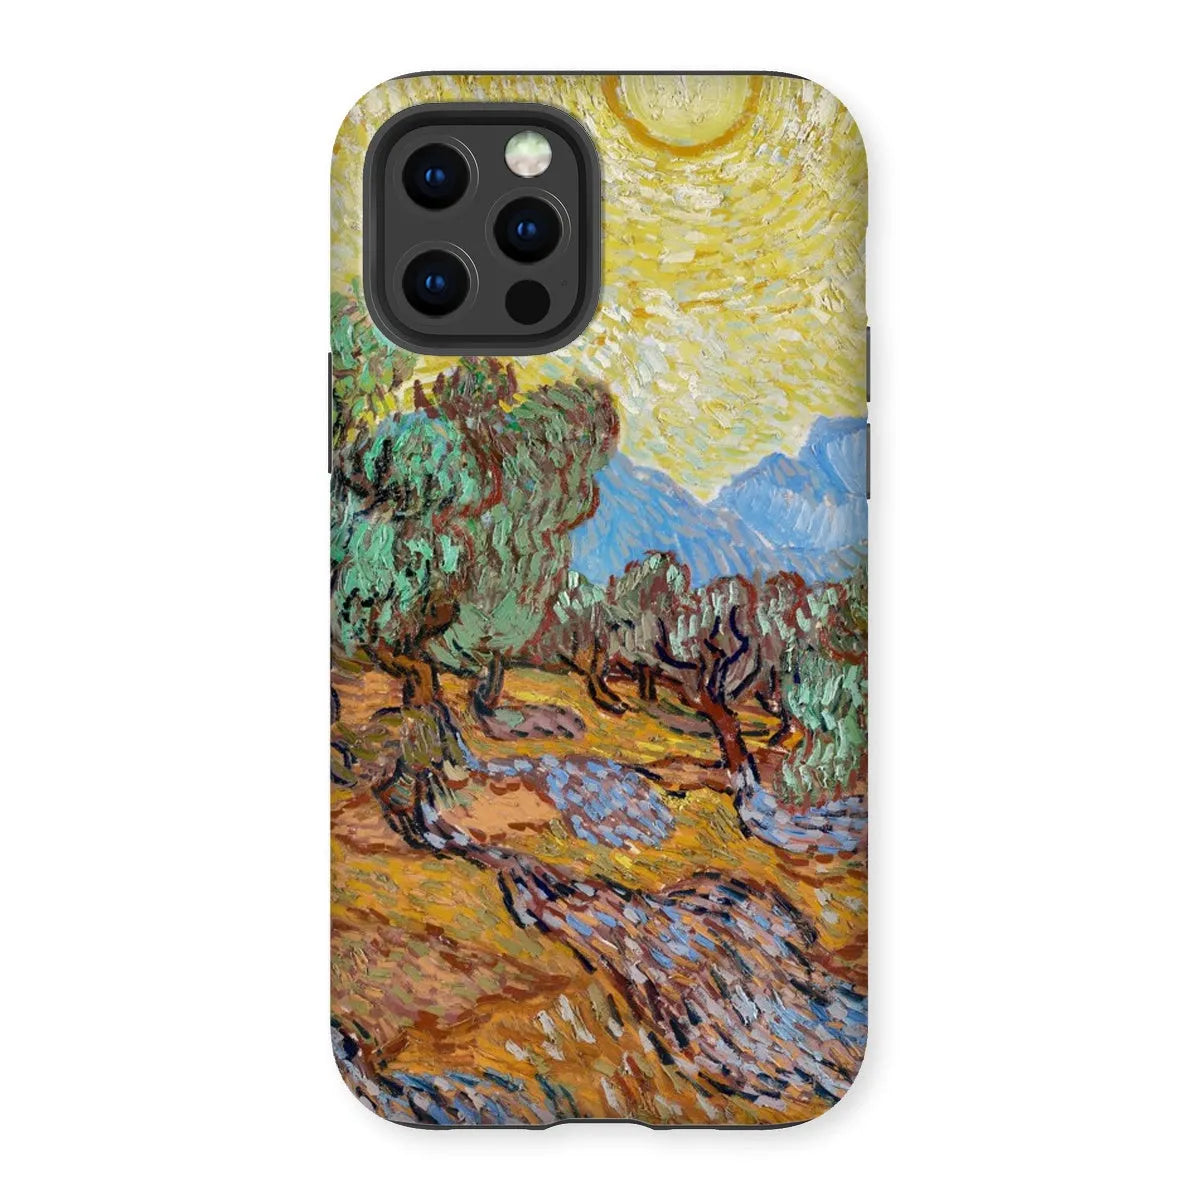 Olive Trees Too - Impressionist Phone Case - Vincent Van Gogh - Iphone 12 Pro / Matte - Mobile Phone Cases - Aesthetic